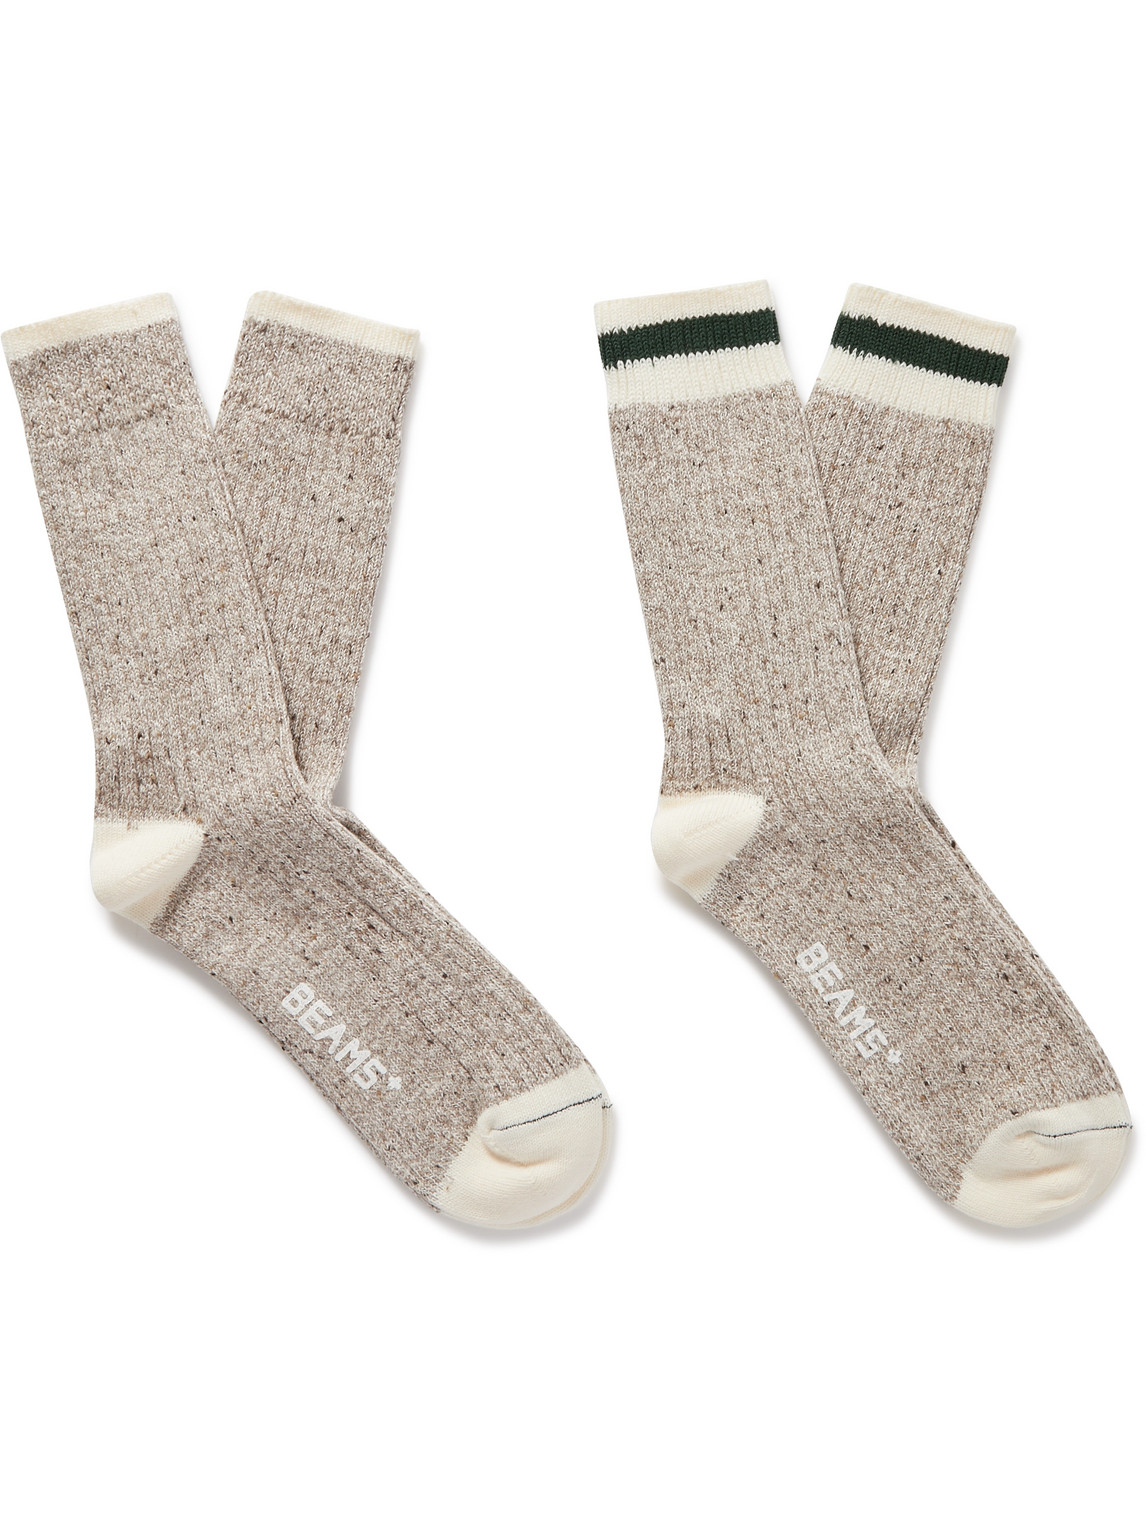 Rag Pack of Two Striped Ribbed Cotton-Blend Socks